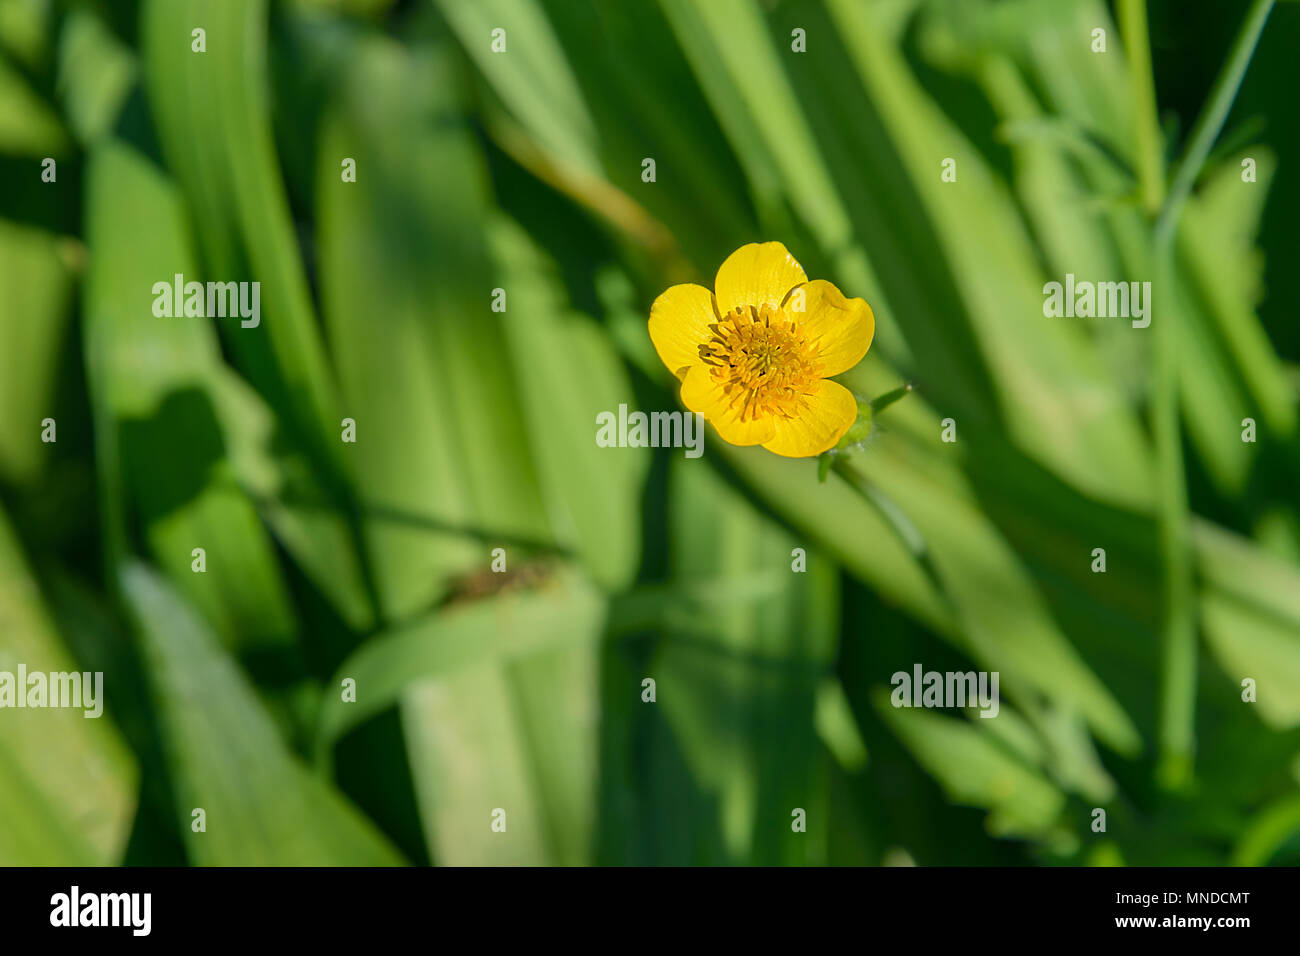 Flower of the Buttercup acrid photographed on a background of green grass Stock Photo